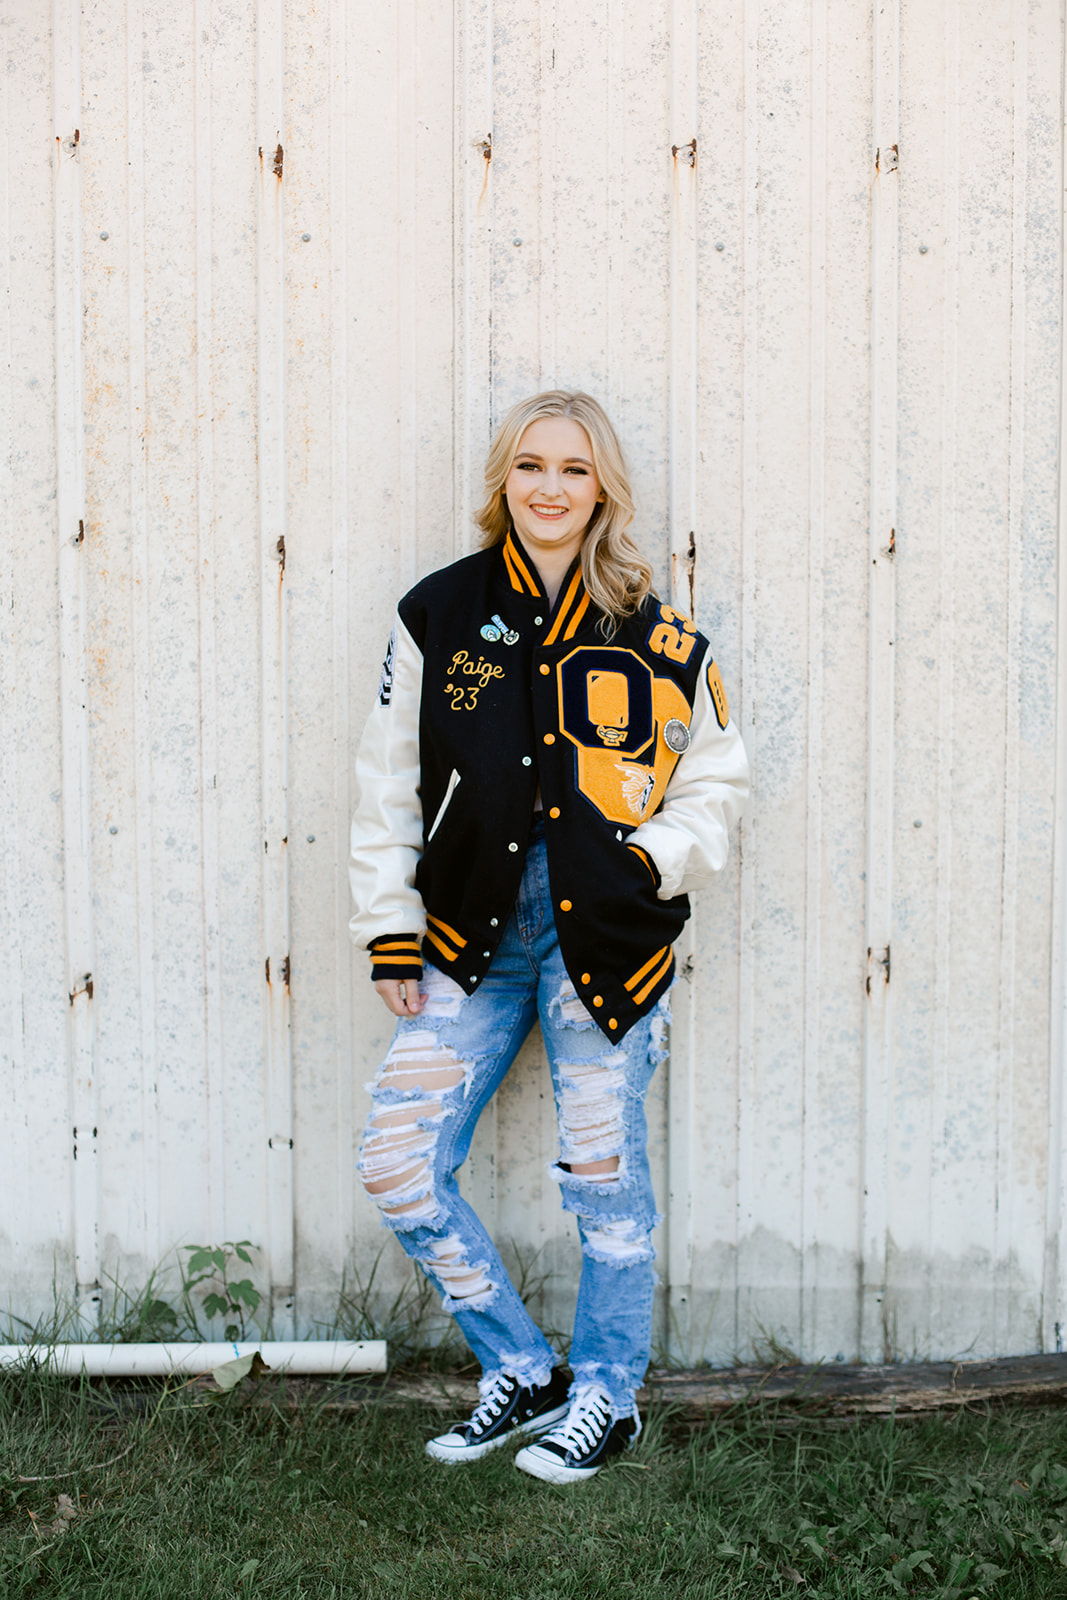 Paige wearing her letterman equestrian jacket for her senior portraits.